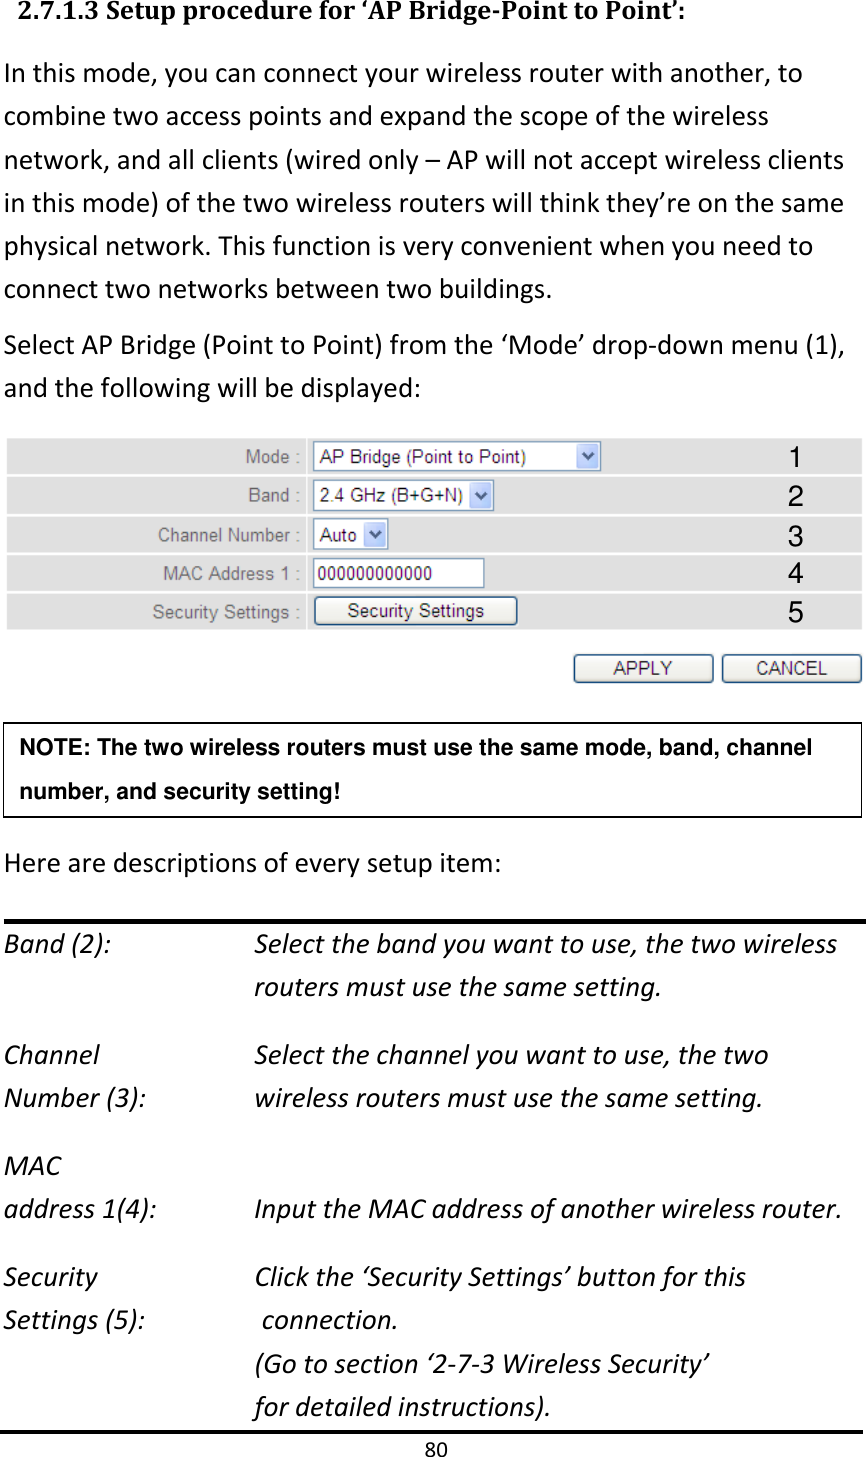 80   2.7.1.3 Setup procedure for ‘AP Bridge-Point to Point’: In this mode, you can connect your wireless router with another, to combine two access points and expand the scope of the wireless network, and all clients (wired only – AP will not accept wireless clients in this mode) of the two wireless routers will think they’re on the same physical network. This function is very convenient when you need to connect two networks between two buildings.   Select AP Bridge (Point to Point) from the ‘Mode’ drop-down menu (1), and the following will be displayed:    Here are descriptions of every setup item: Band (2):   Select the band you want to use, the two wireless routers must use the same setting. Channel   Select the channel you want to use, the two   Number (3):  wireless routers must use the same setting. MAC address 1(4):  Input the MAC address of another wireless router. Security        Click the ‘Security Settings’ button for this   Settings (5):                connection.   (Go to section ‘2-7-3 Wireless Security’   for detailed instructions). NOTE: The two wireless routers must use the same mode, band, channel number, and security setting!  1 2 3 4 5 